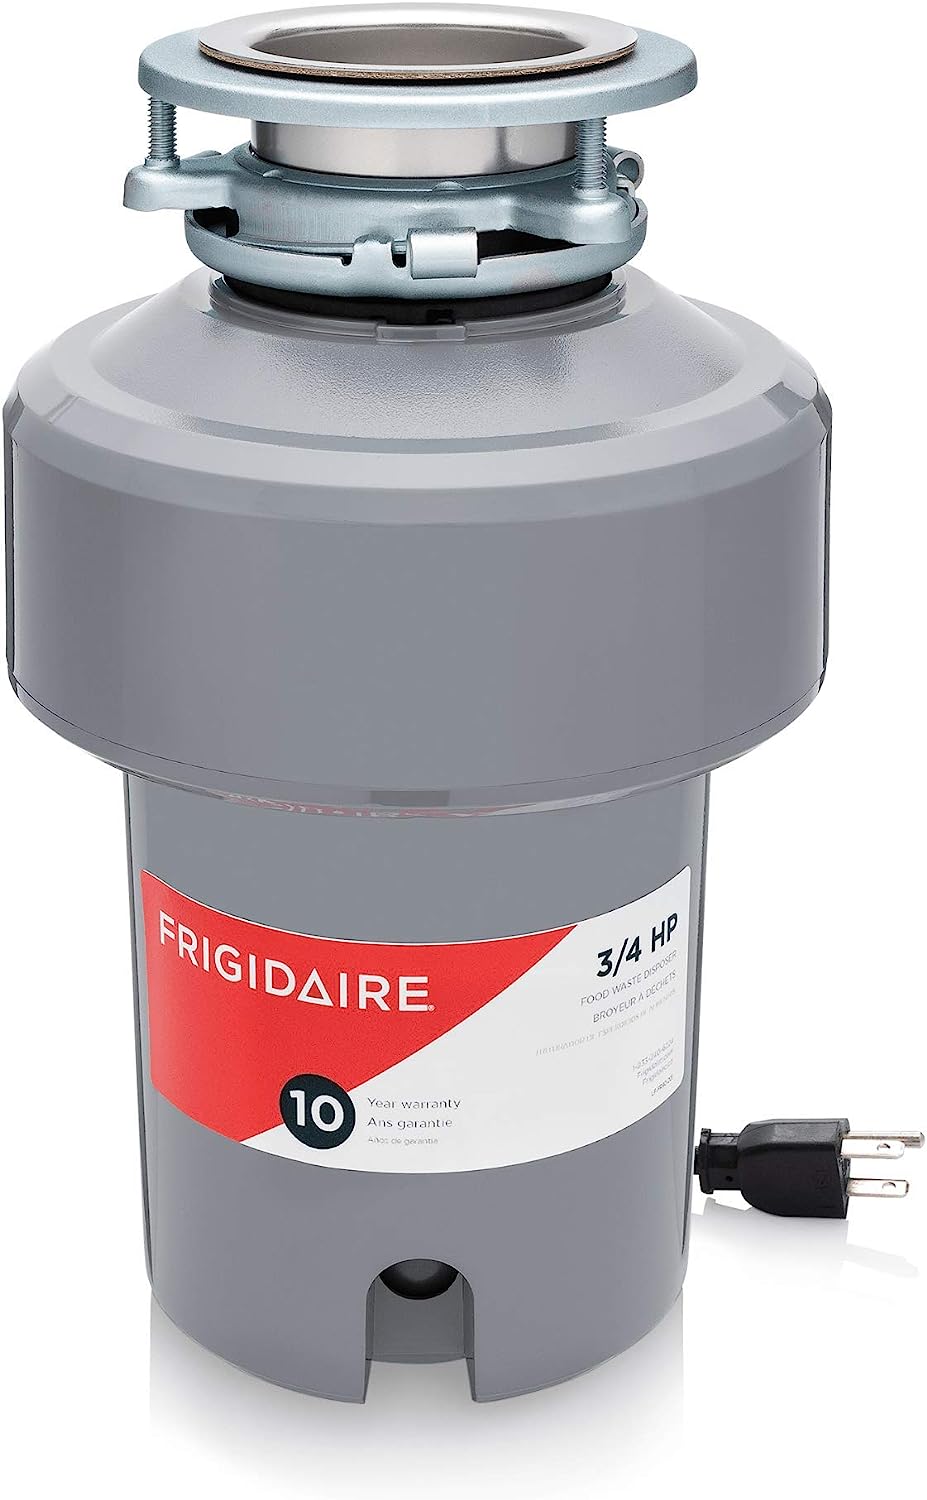 Frigidaire 3/4 HP Corded Garbage Disposal for Kitchen [...]